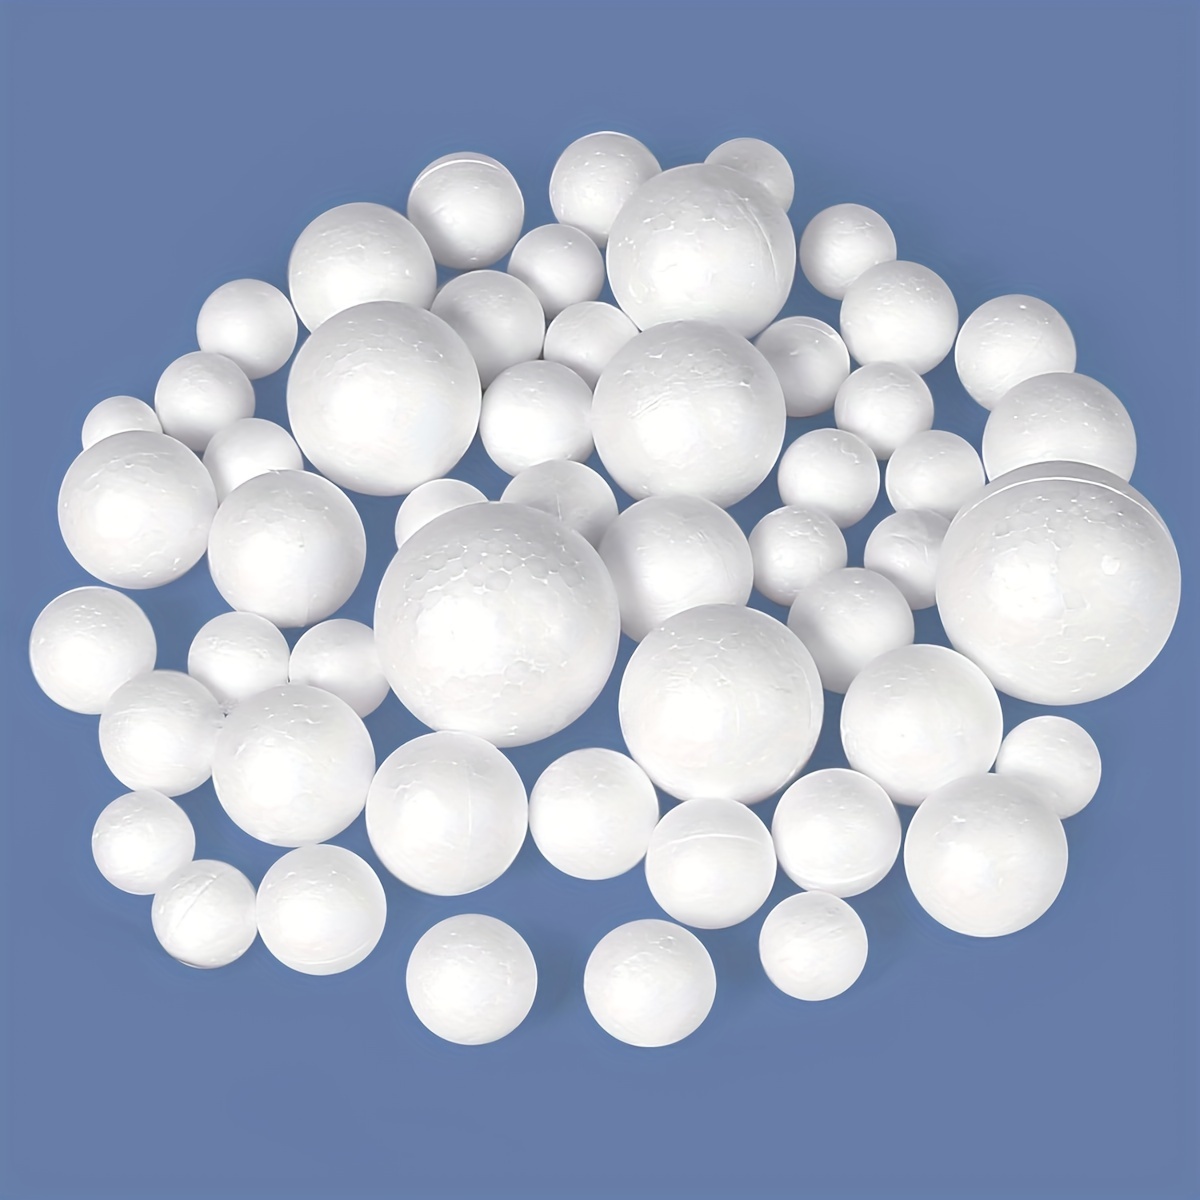 

50 Pack White Foam Craft Balls In Various Sizes, Smooth Polystyrene Spheres For Art And Craft Projects, Christmas Diy Home Decor, School Activities, And Holiday Parties.